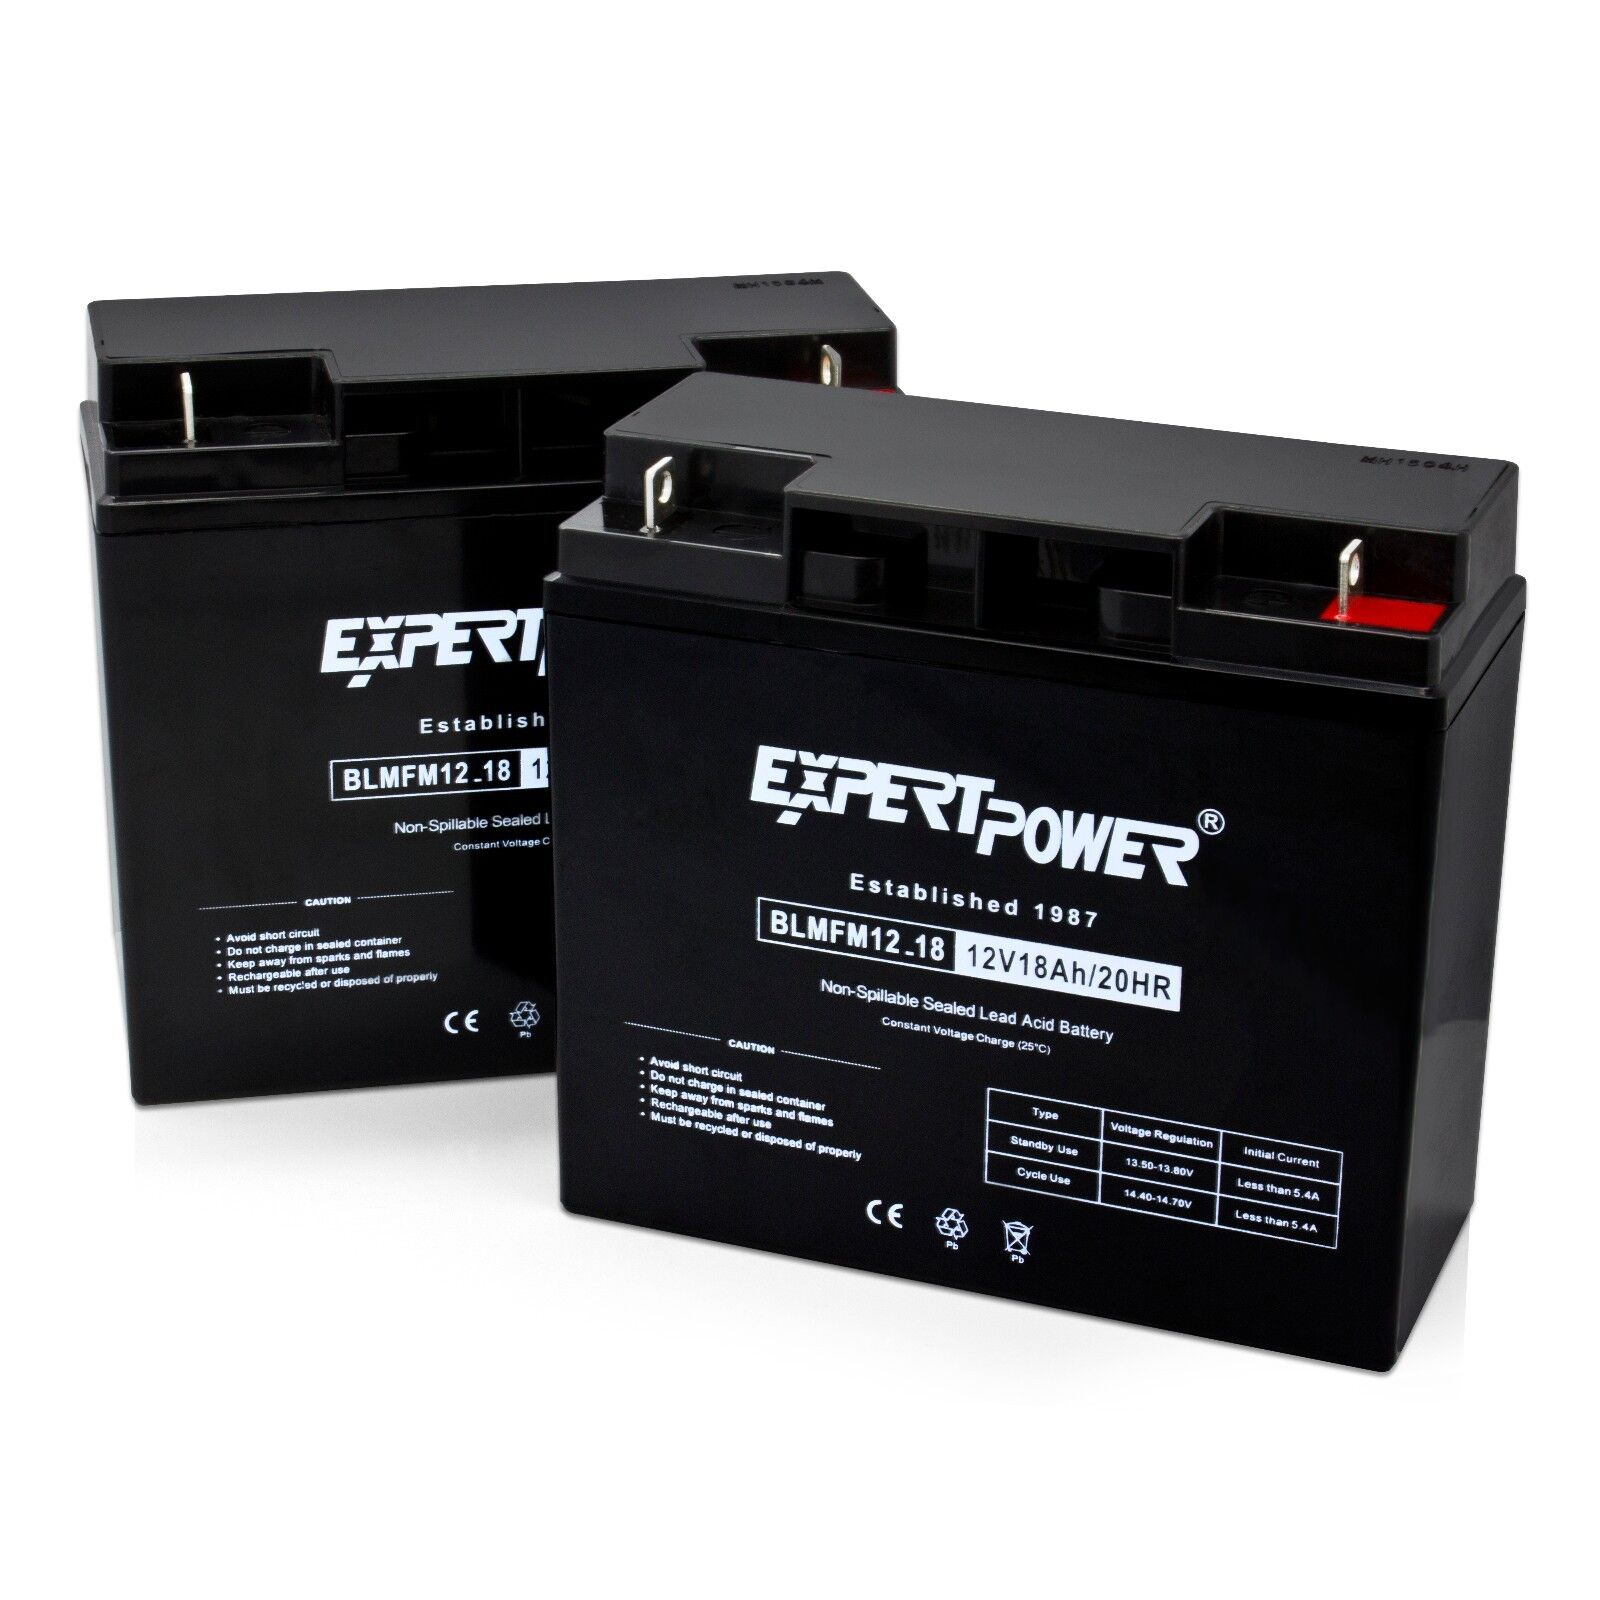 2 PACK Expert Power APC RBC7 Cartridge Battery Replacement for UPS Backup System ExpertPower EXP12180 - фотография #2